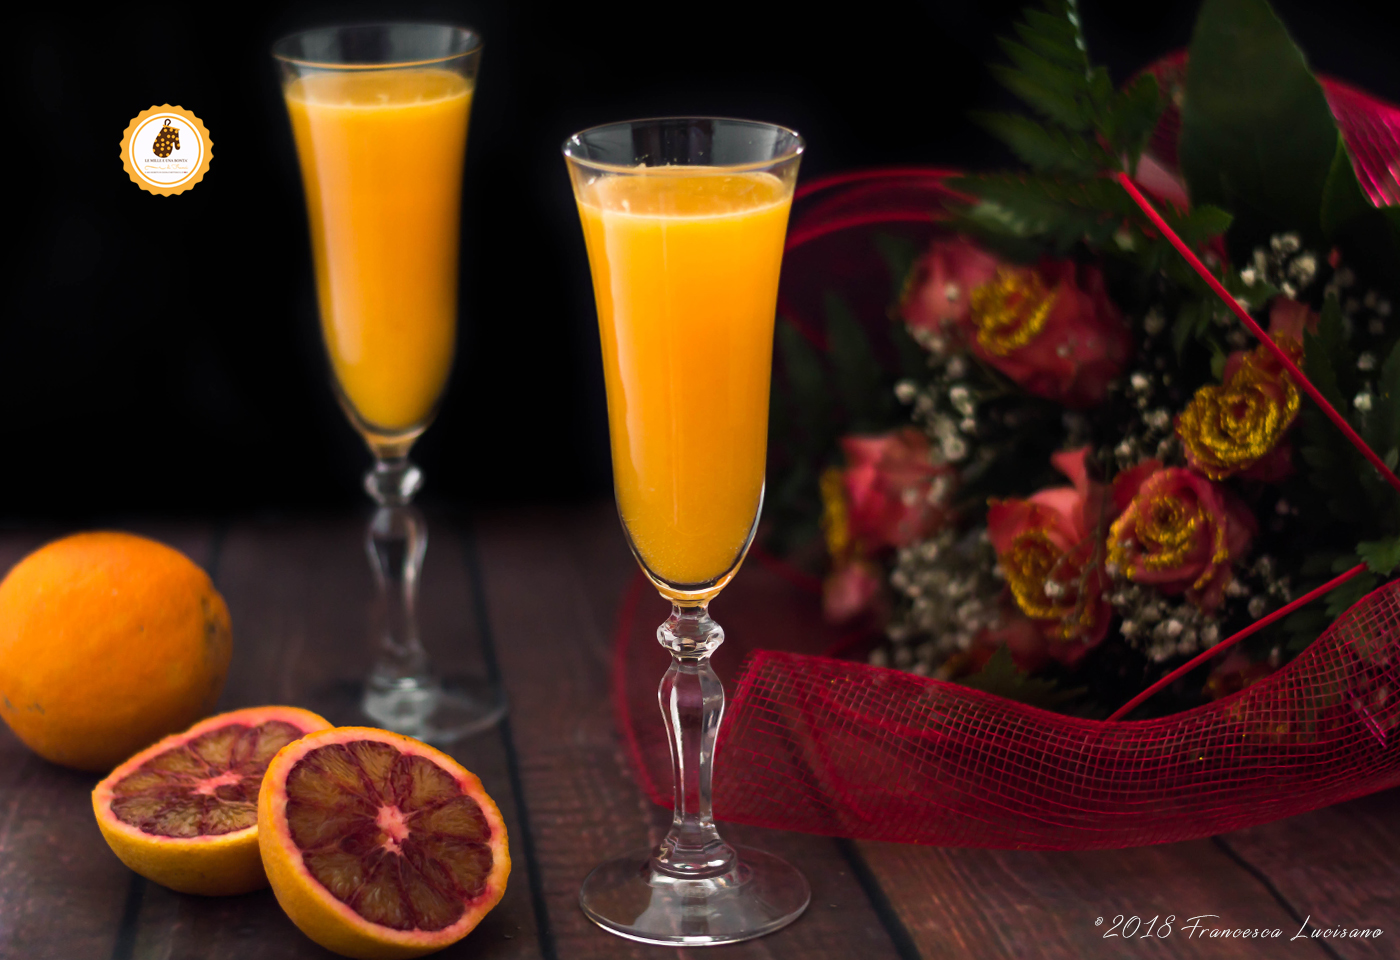 cocktail mimosa